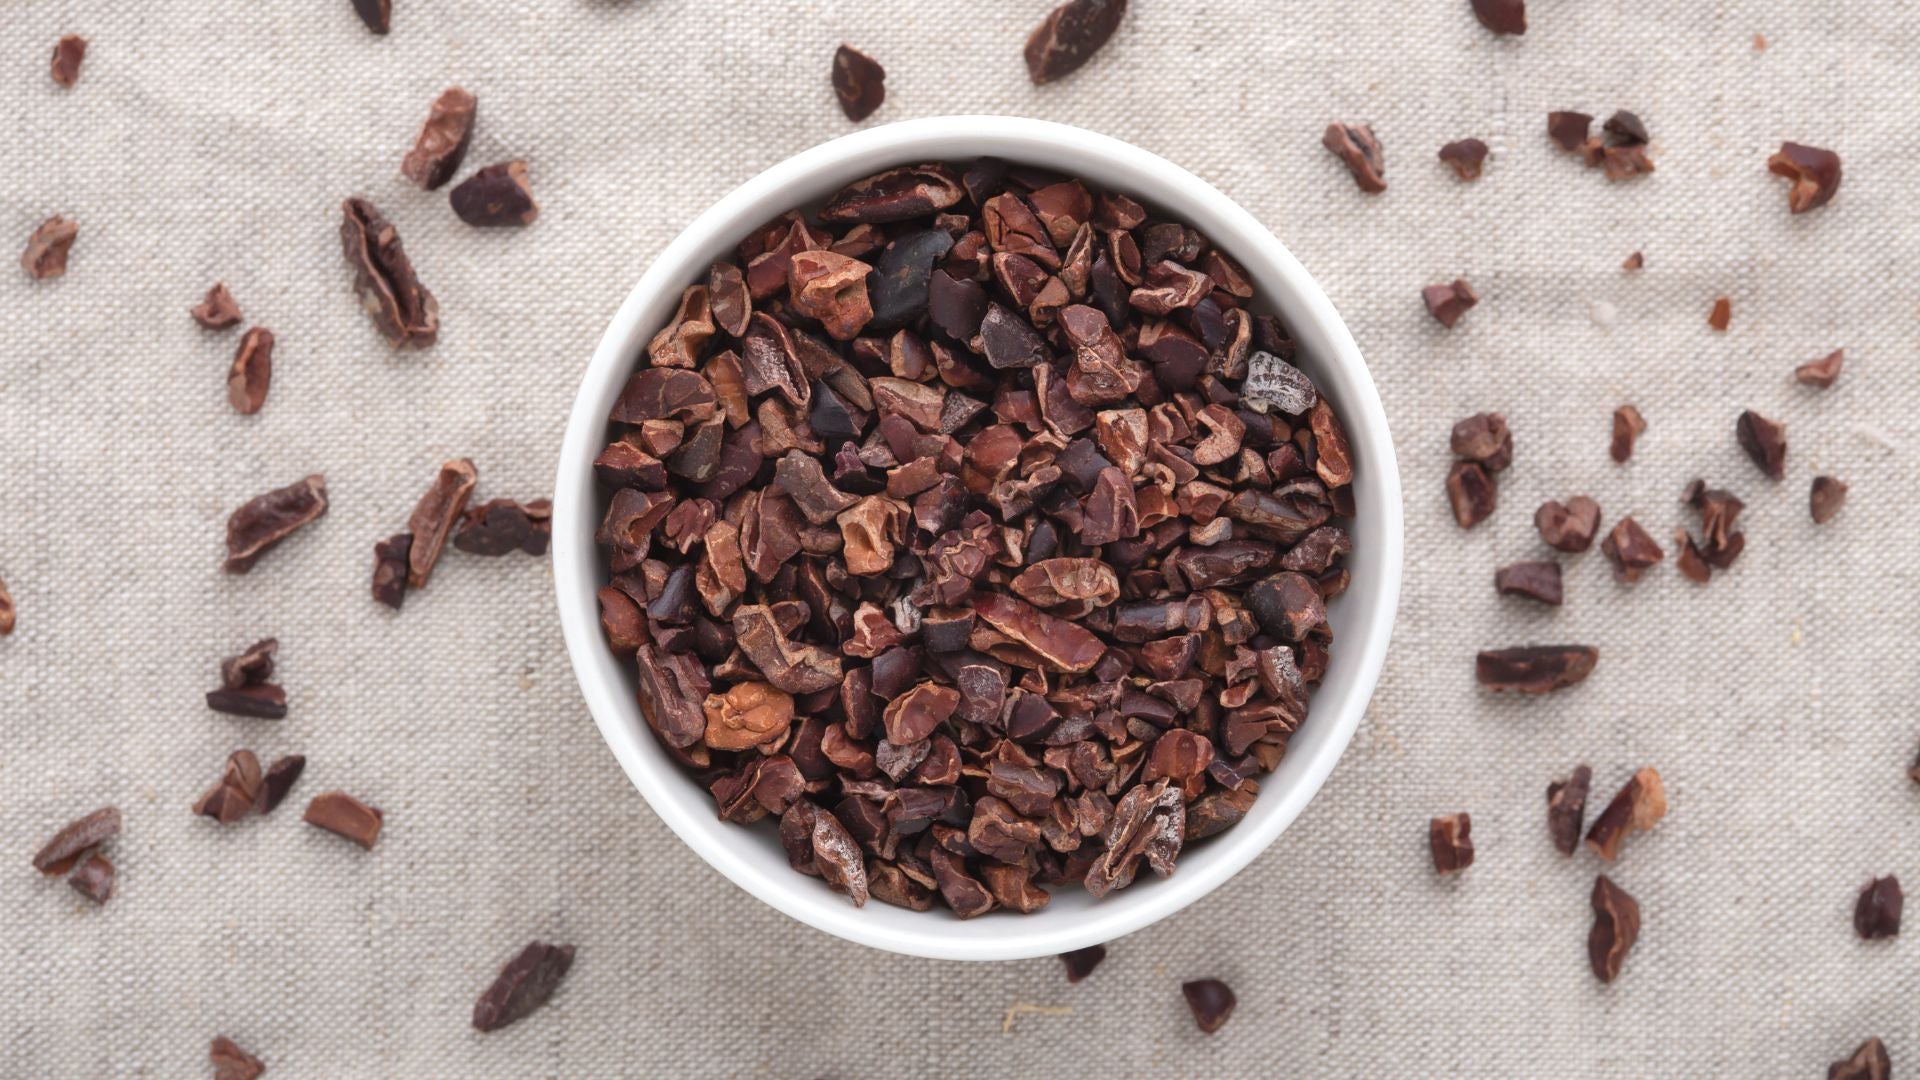 Delicious Cacao Nib Recipes to Try at Home